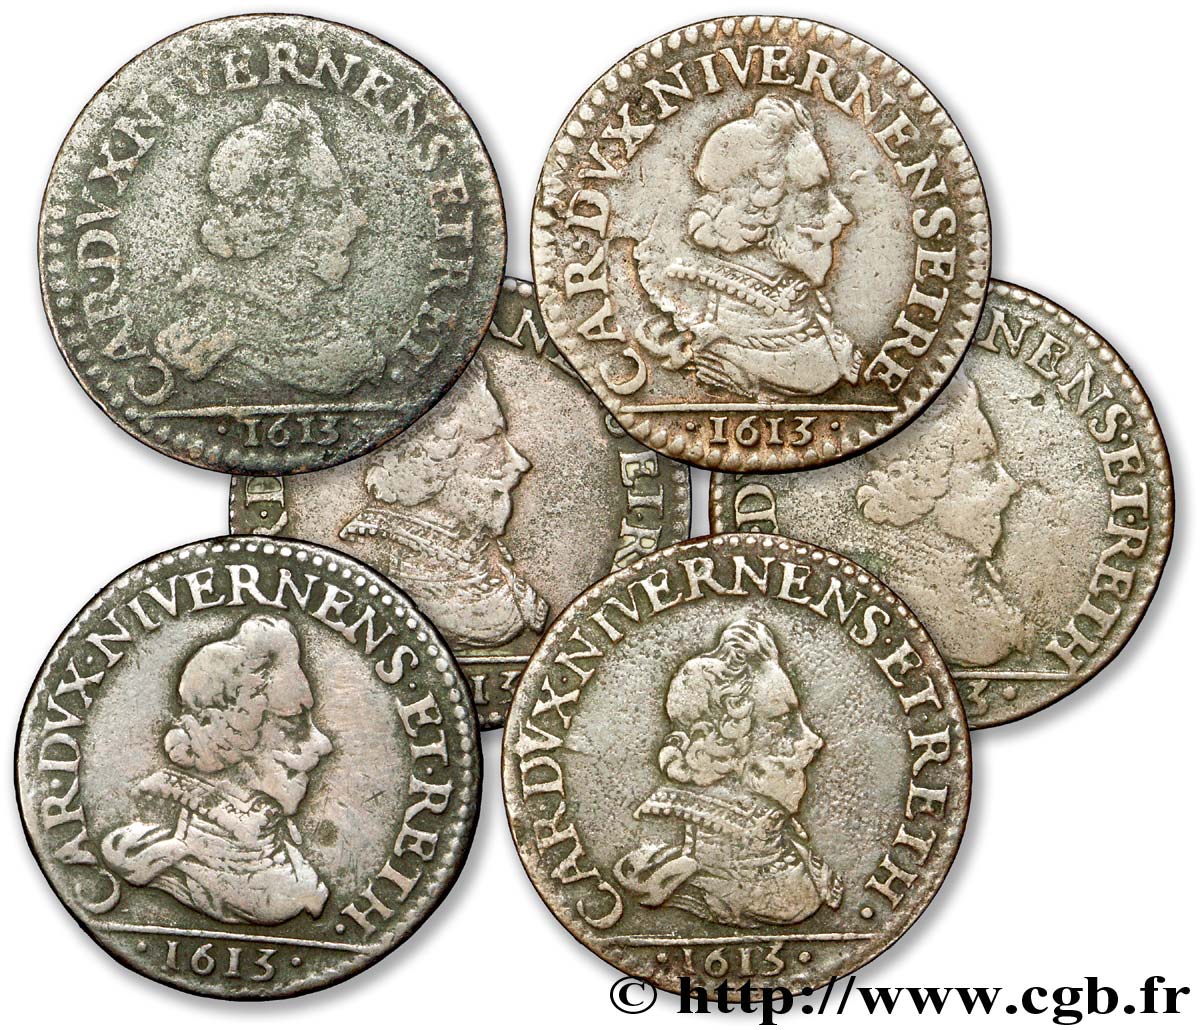 ARDENNES - PRINCIPALITY OF ARCHES-CHARLEVILLE - CHARLES I GONZAGA Lot de 6 liards, type 3B 